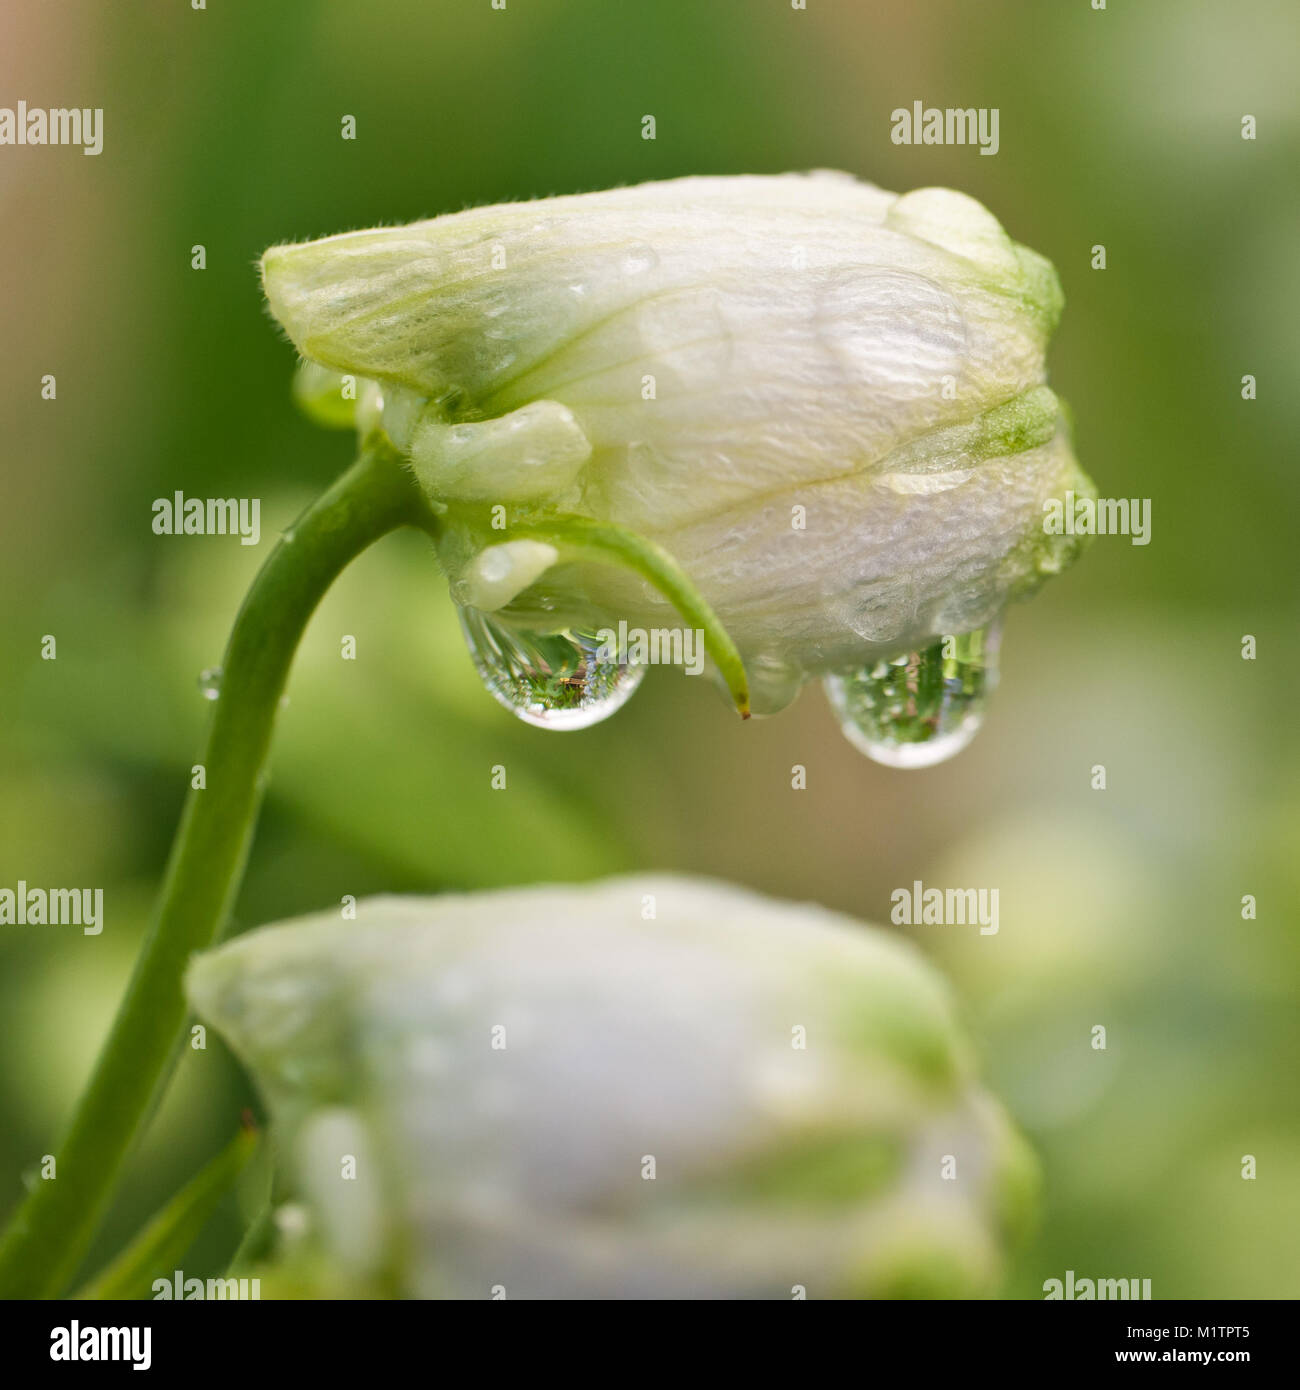 Droplets of water hanging from a delphinium bud. Stock Photo